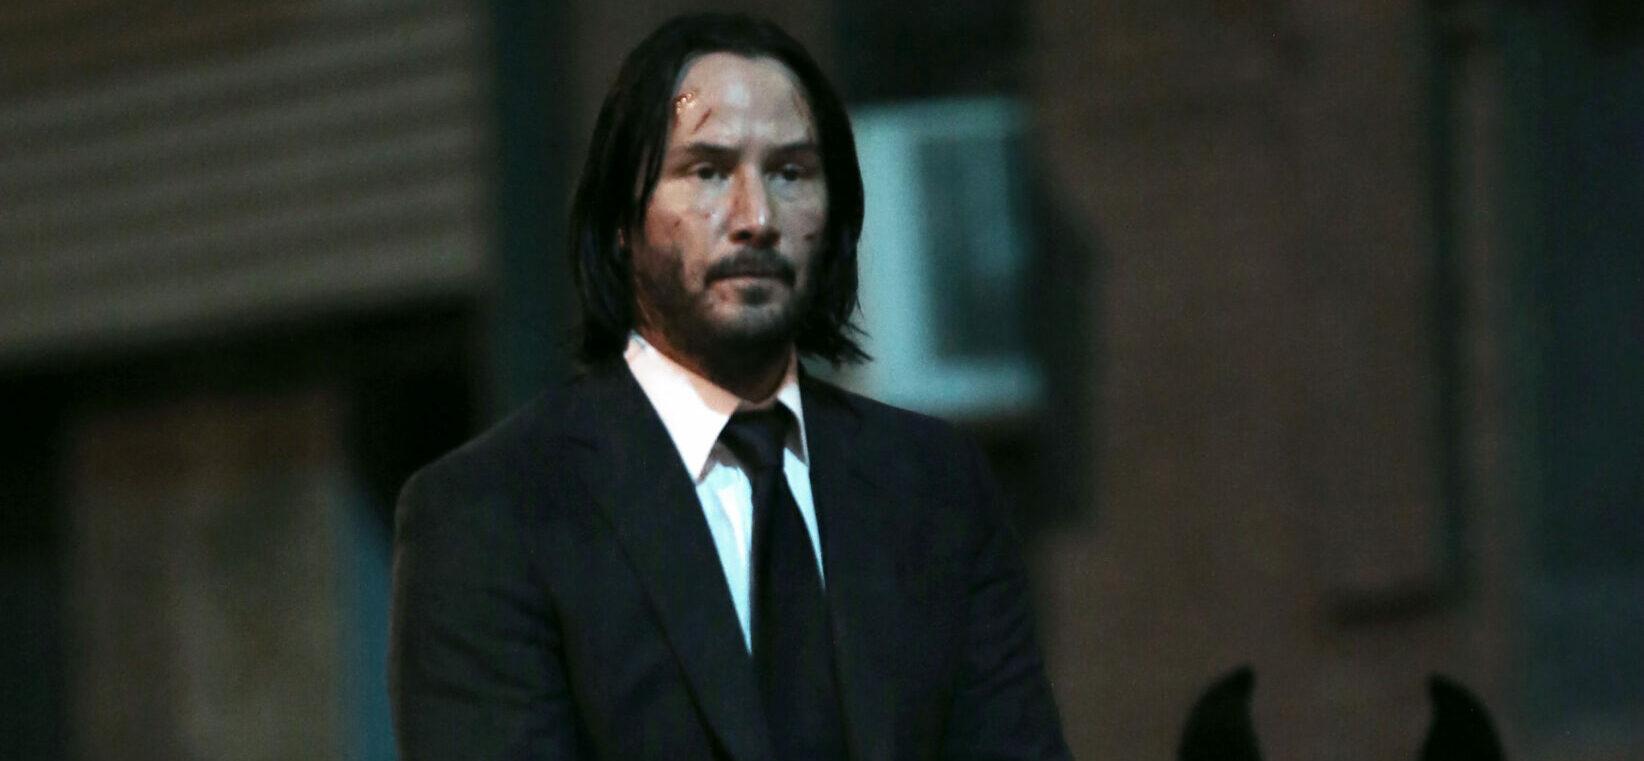 Fans Lose It As ‘John Wick 4’ Release Is Delayed For Another Year